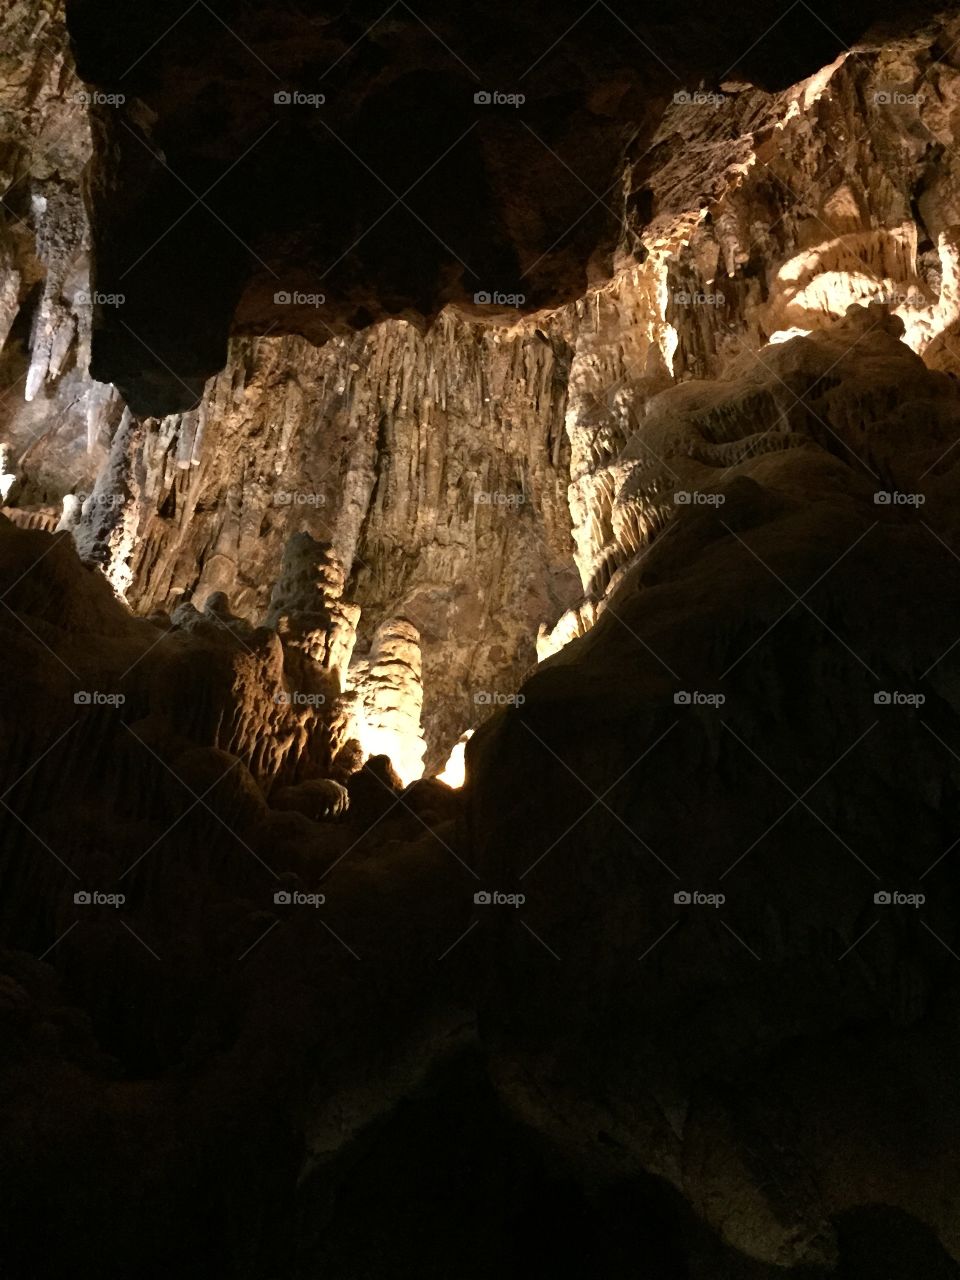 Stalactites abound deep in a cave system